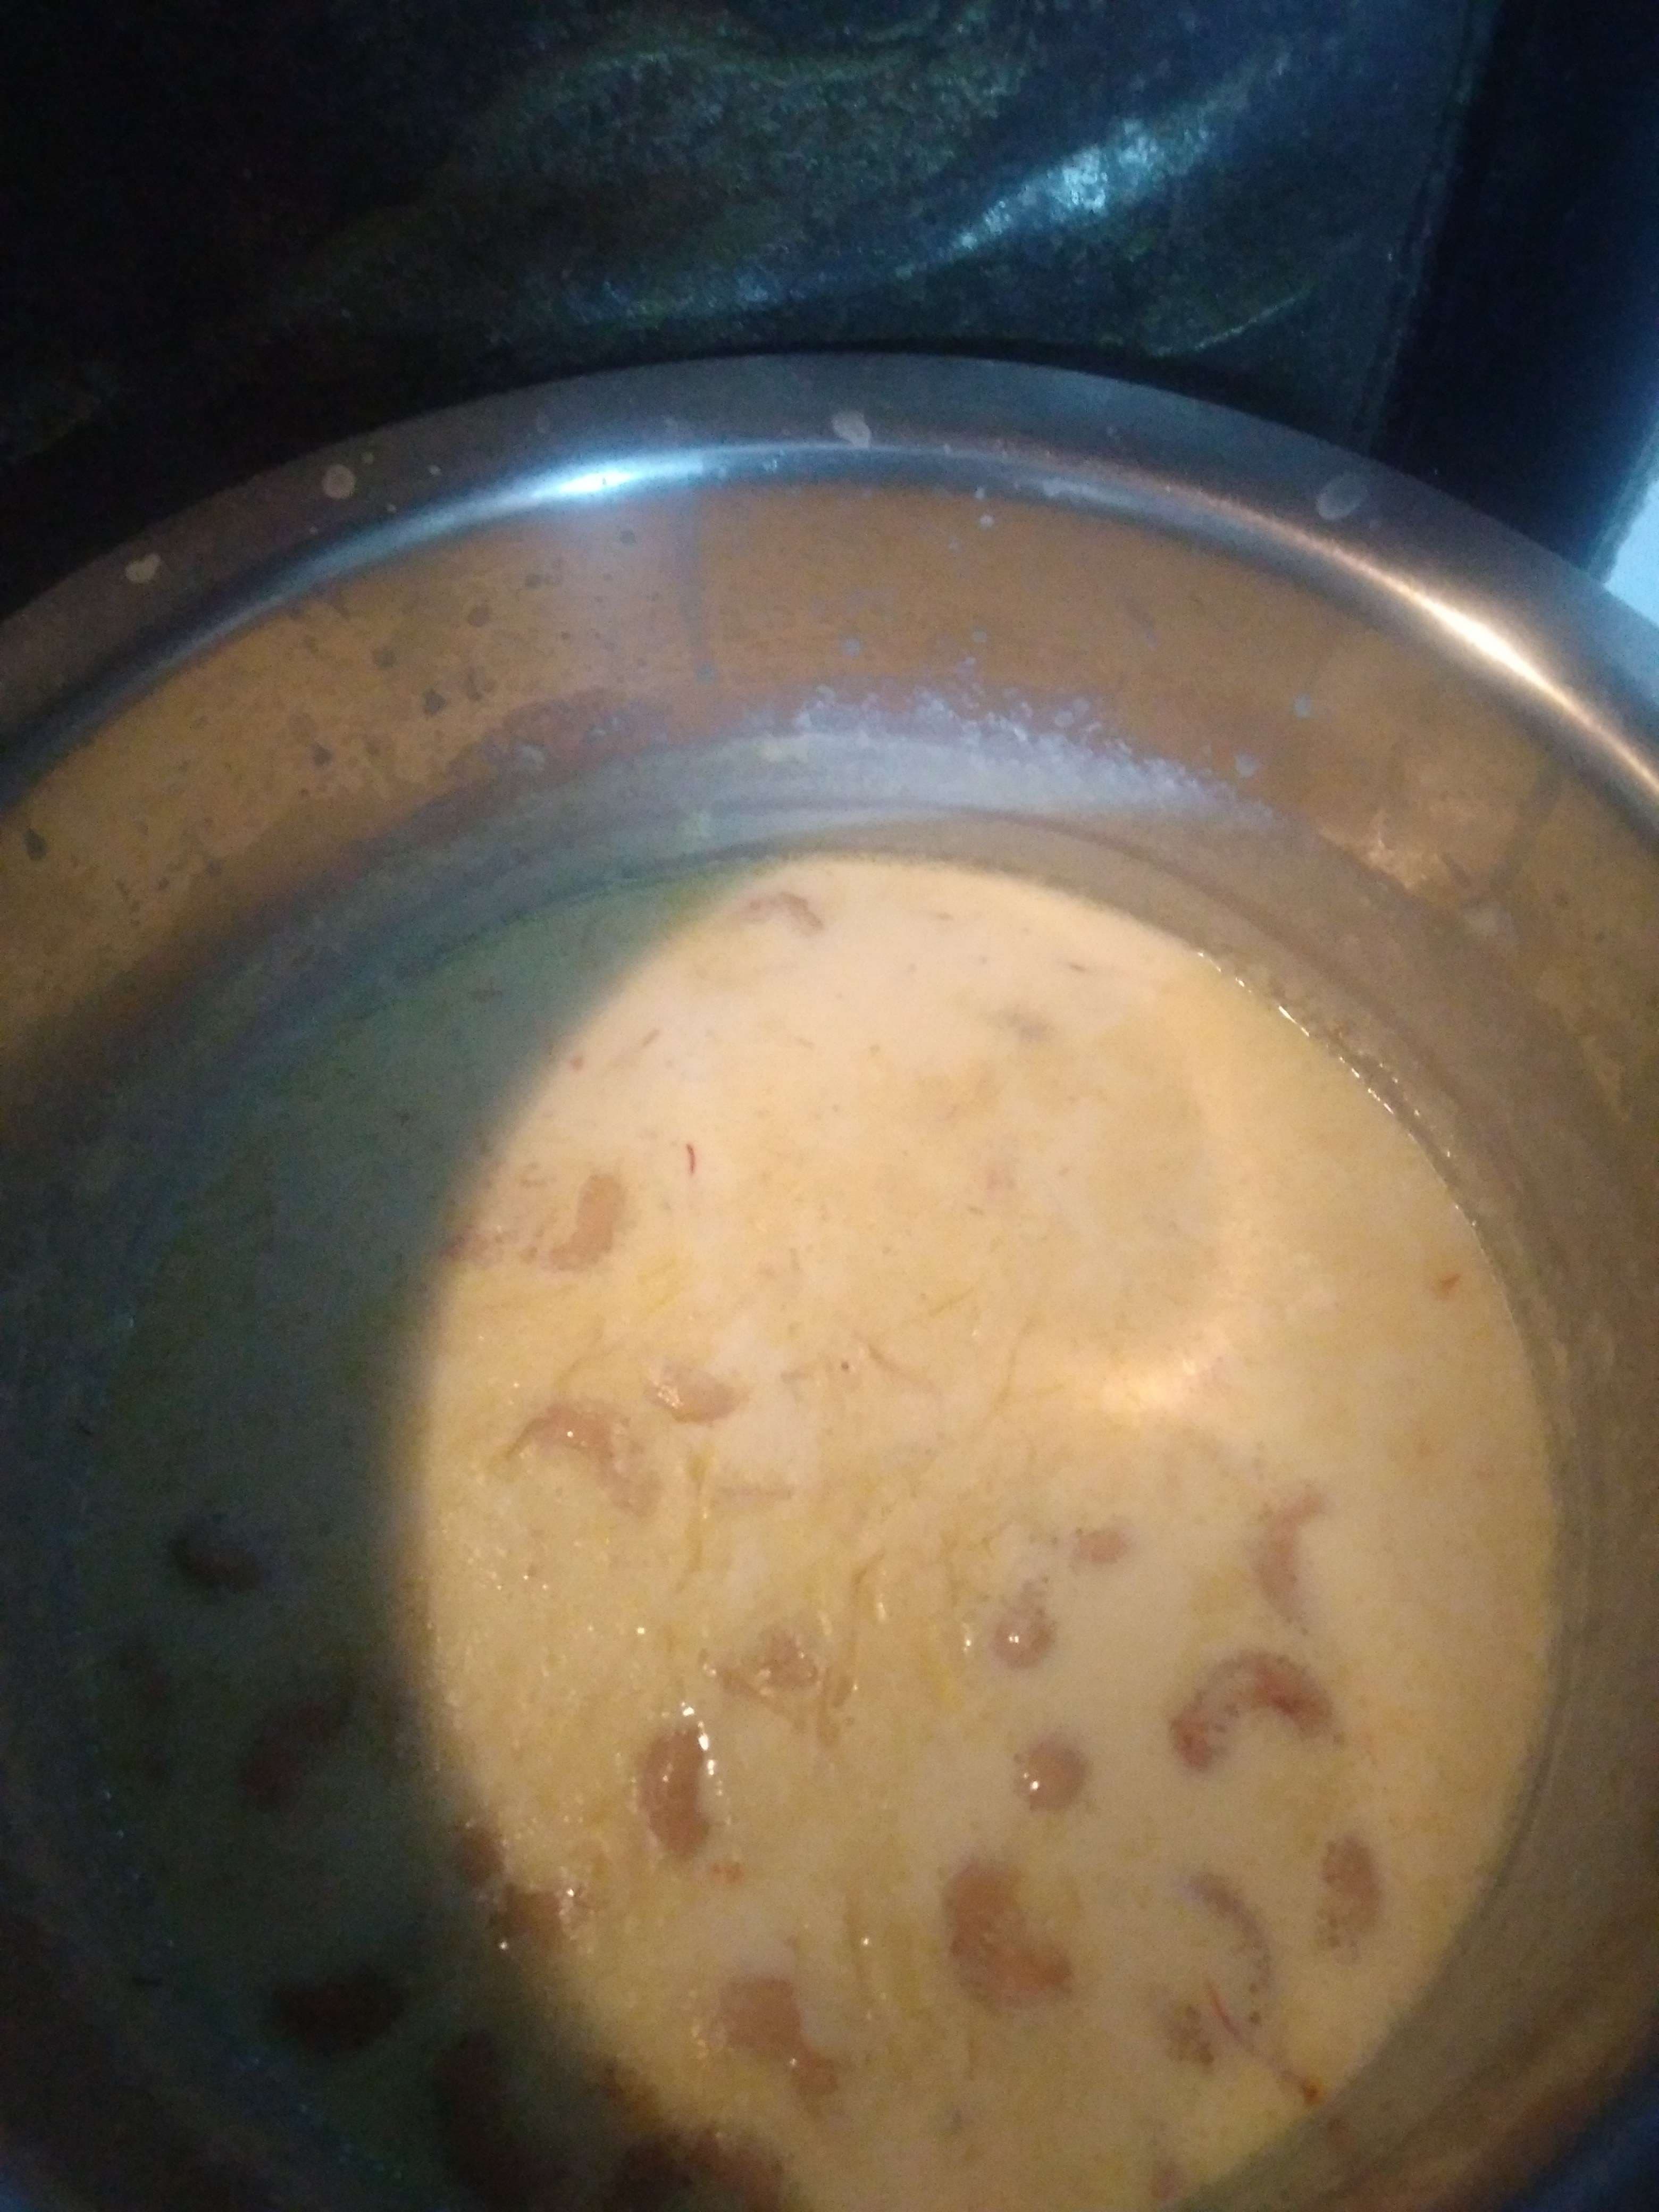 Tasty Seviyan (Payasam) cooked by COOX chefs cooks during occasions parties events at home